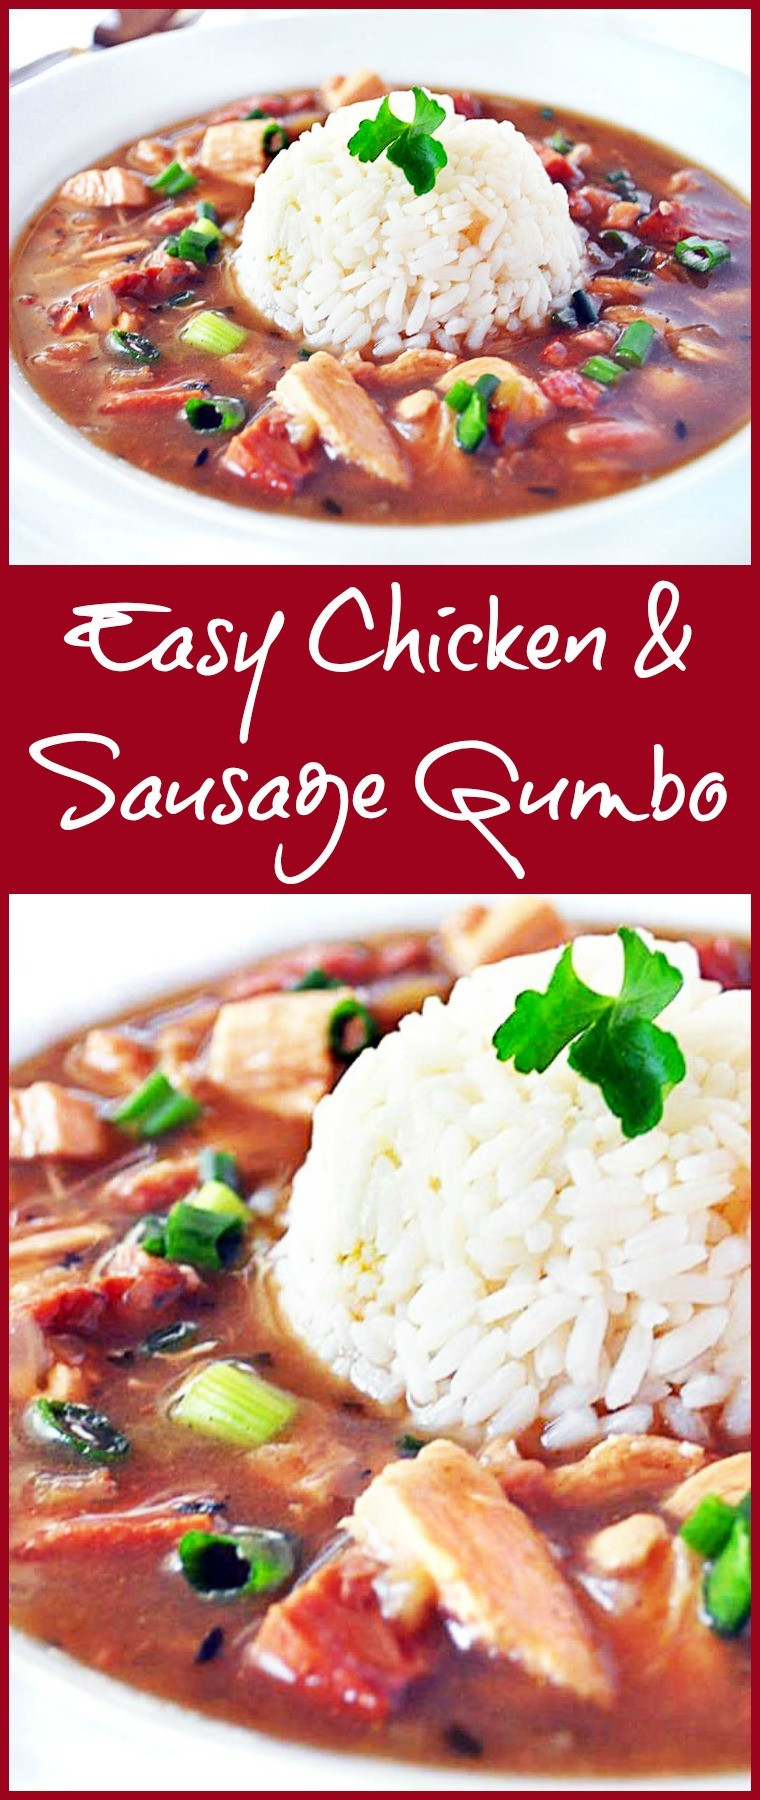 Gumbo Recipe Seafood Chicken And Sausage
 Easy Chicken and Sausage Gumbo recipe